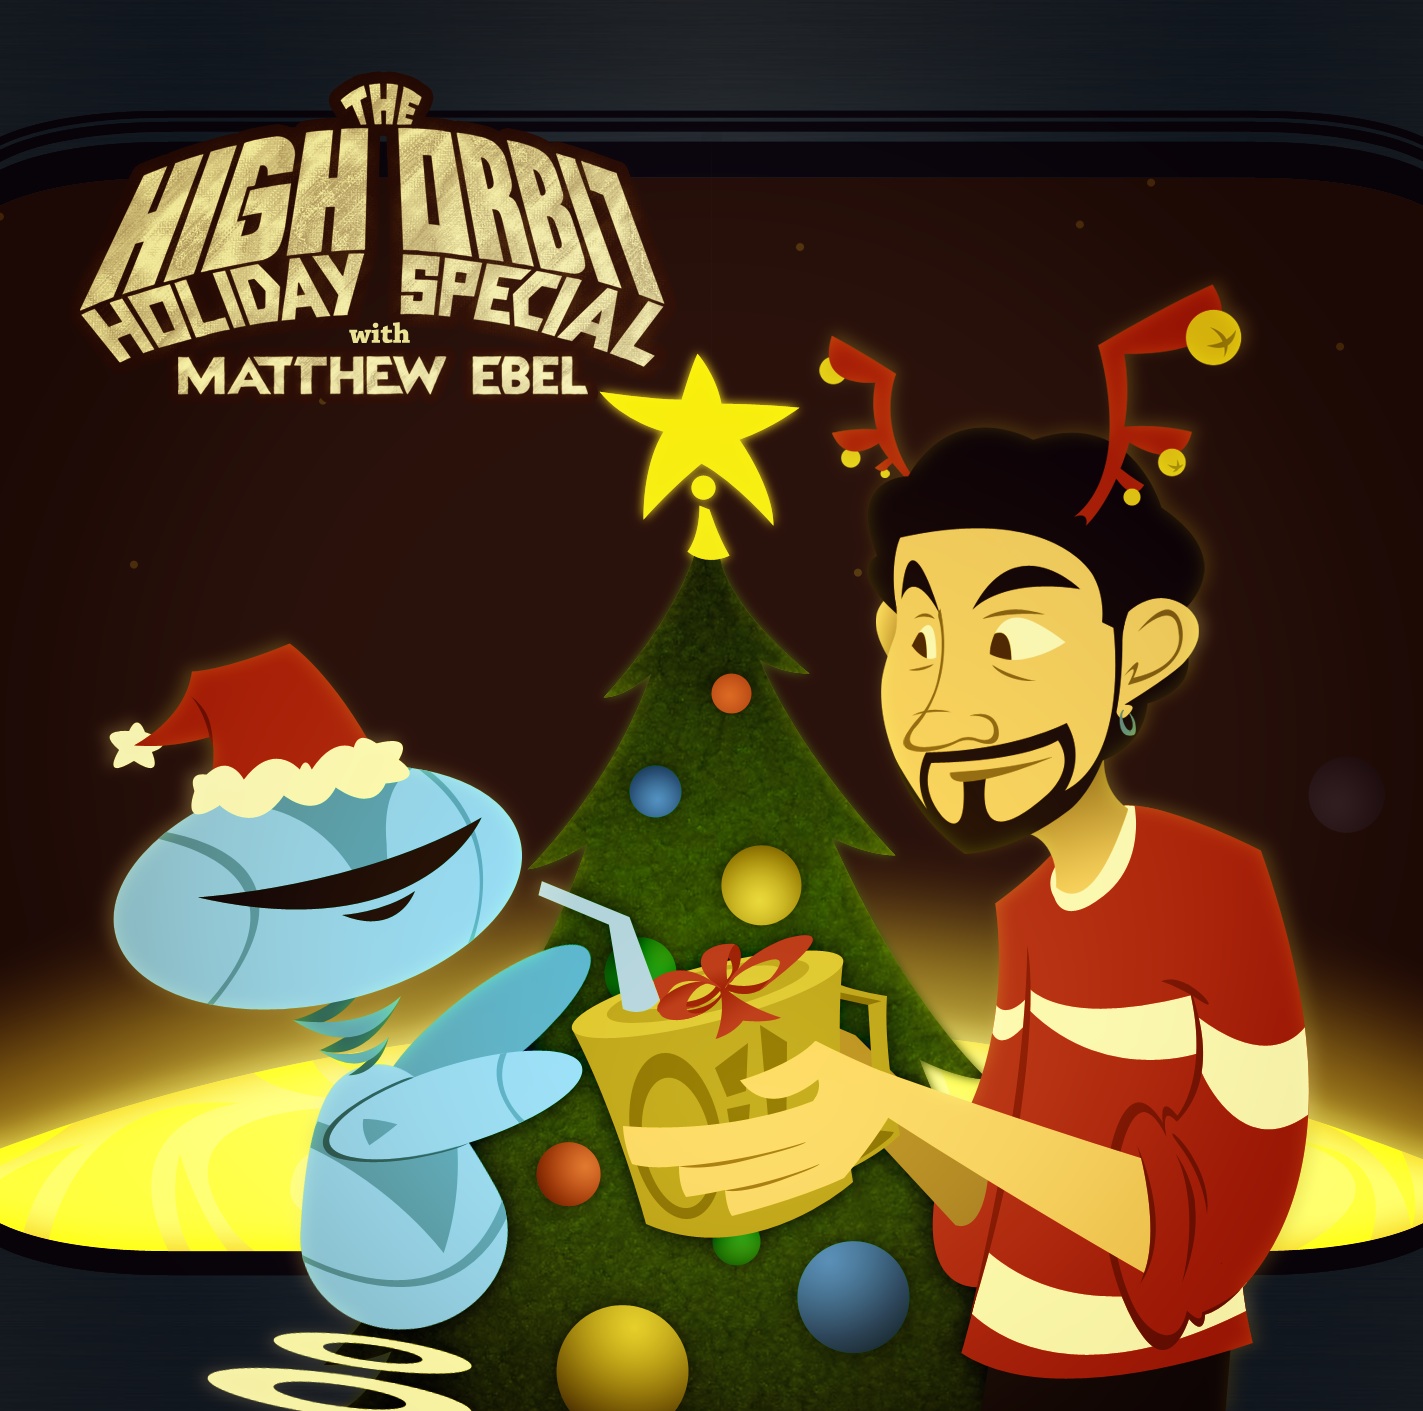 The High Orbit Holiday Special